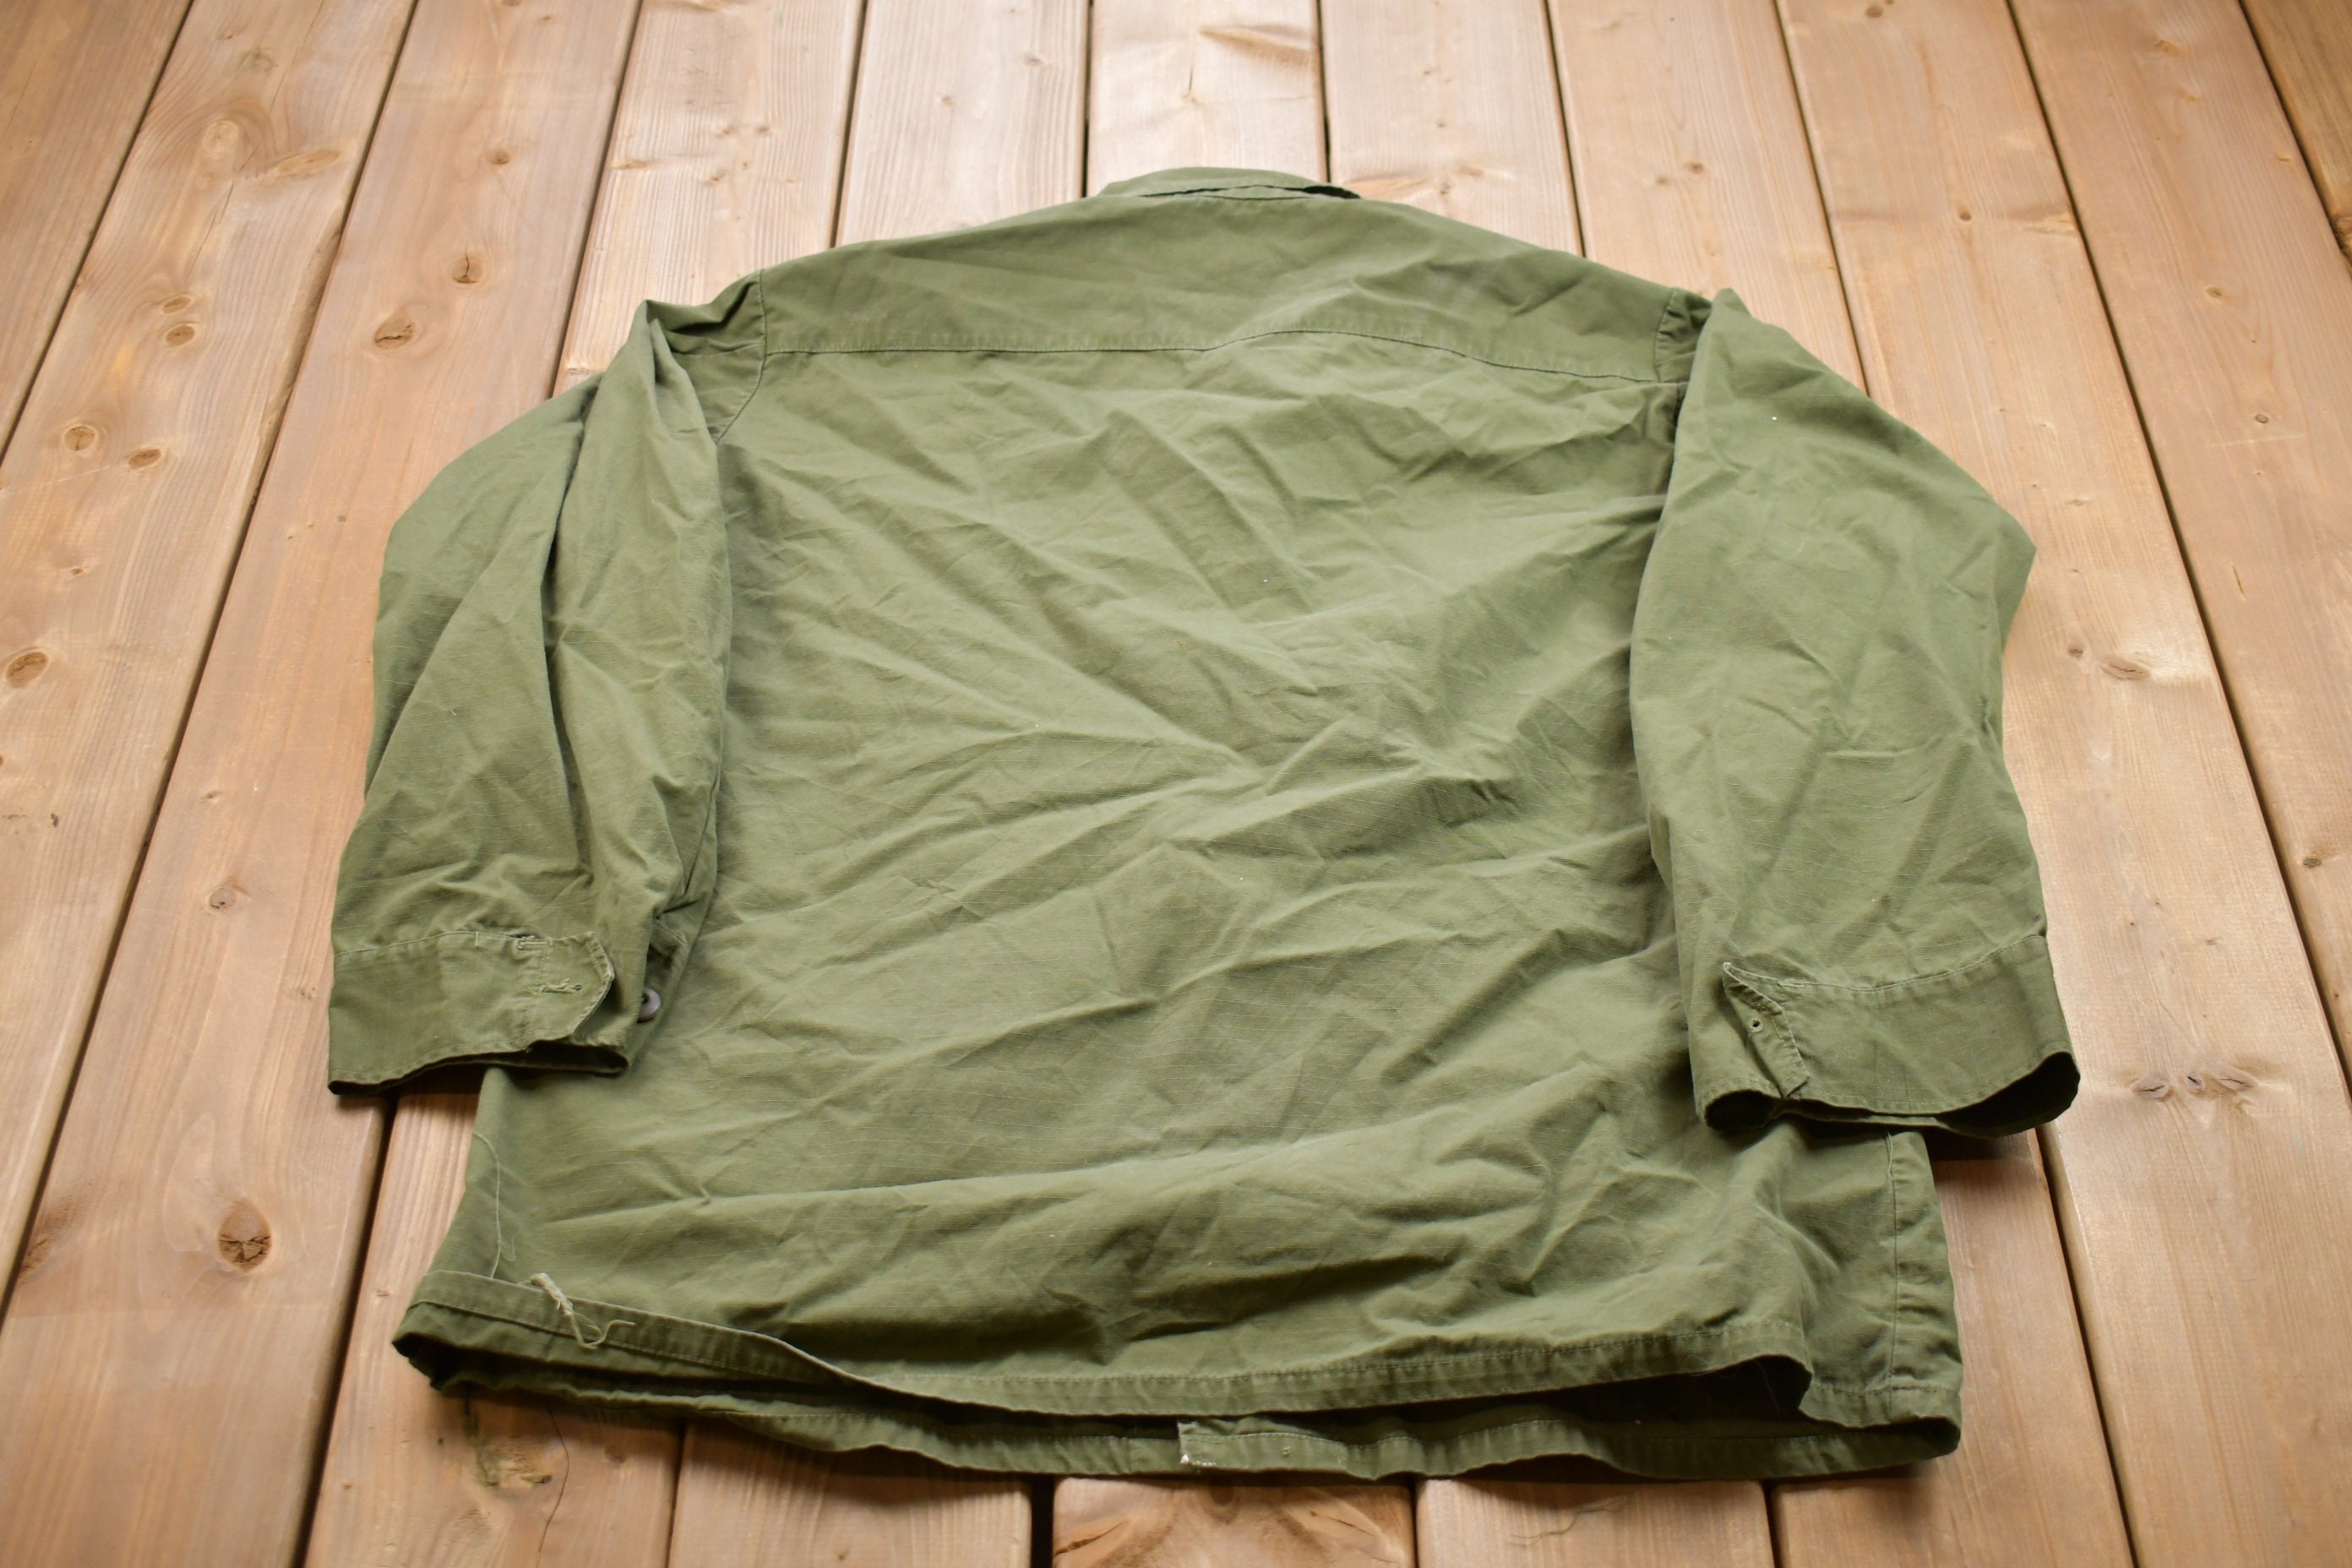 Vintage 1980s Military Field Jacket / Button up Jacket / US Army 